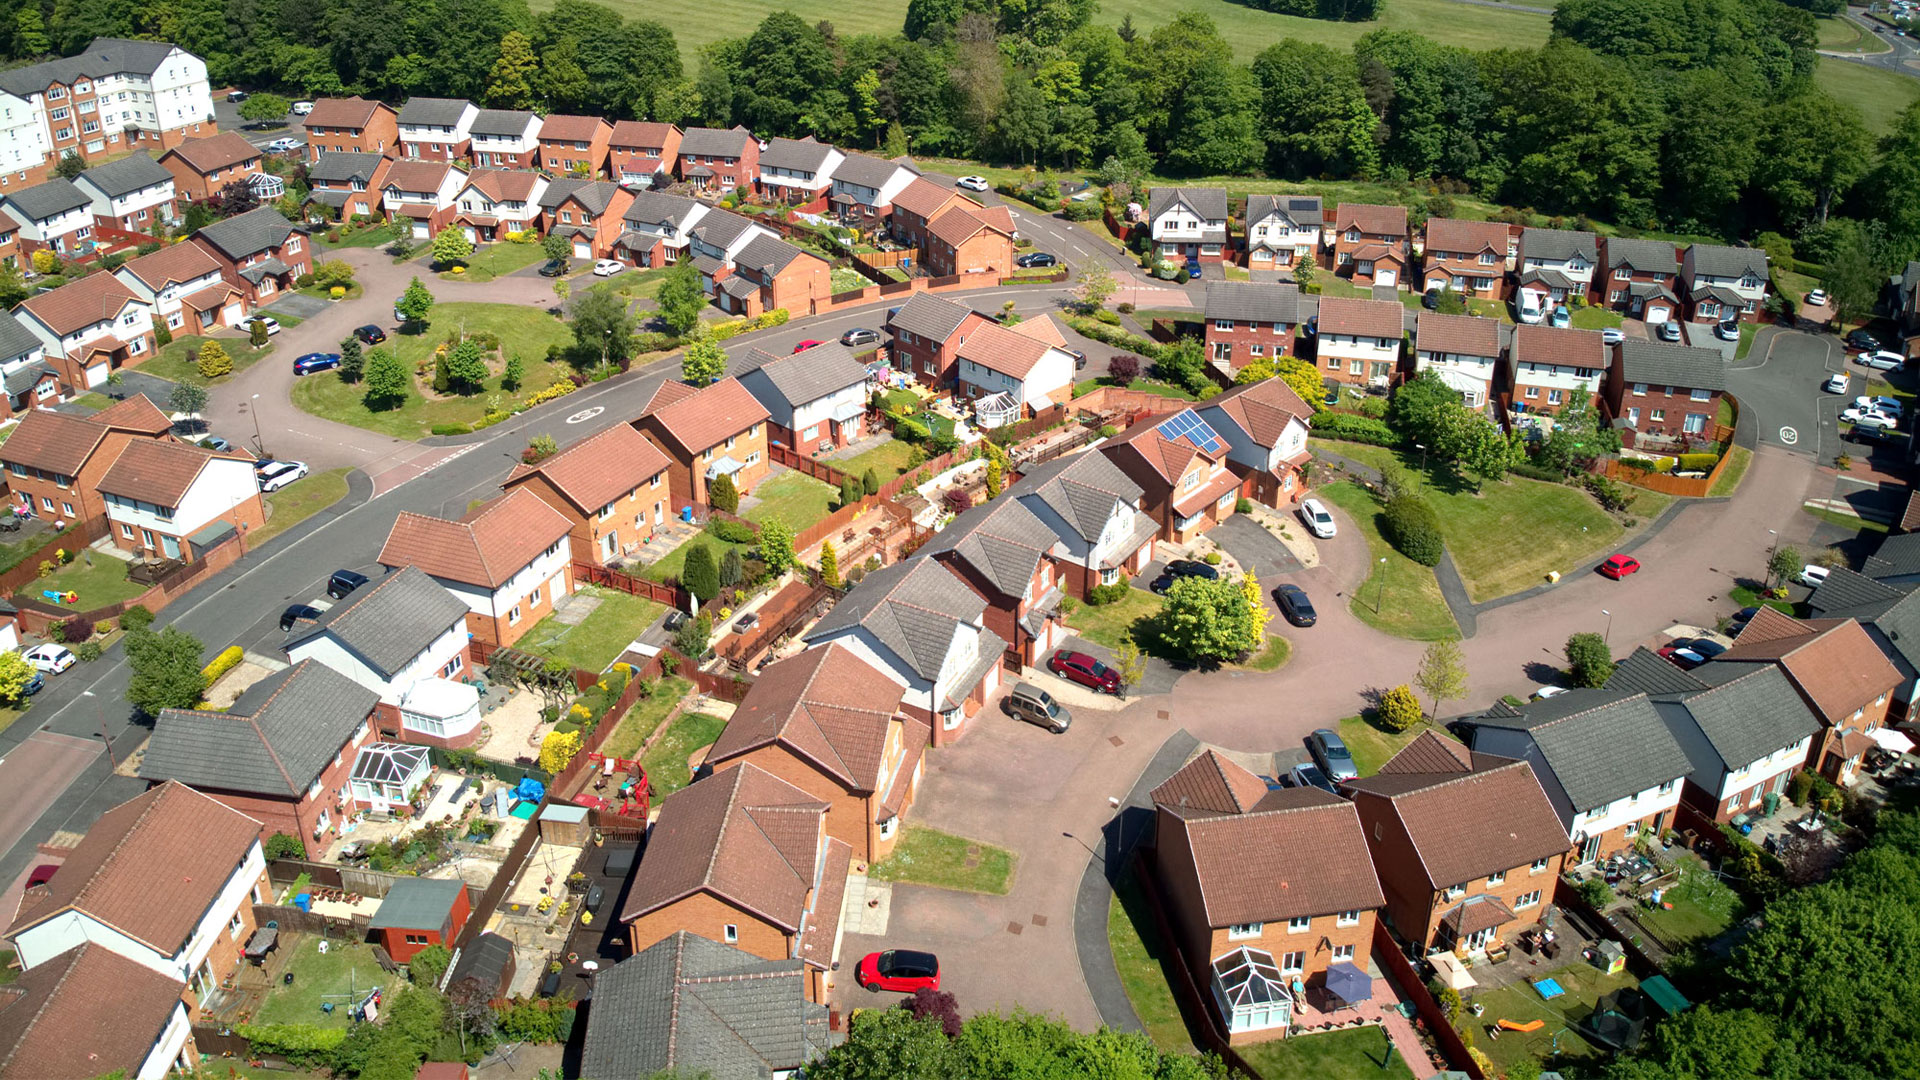 Arial view of a housing estate
                        